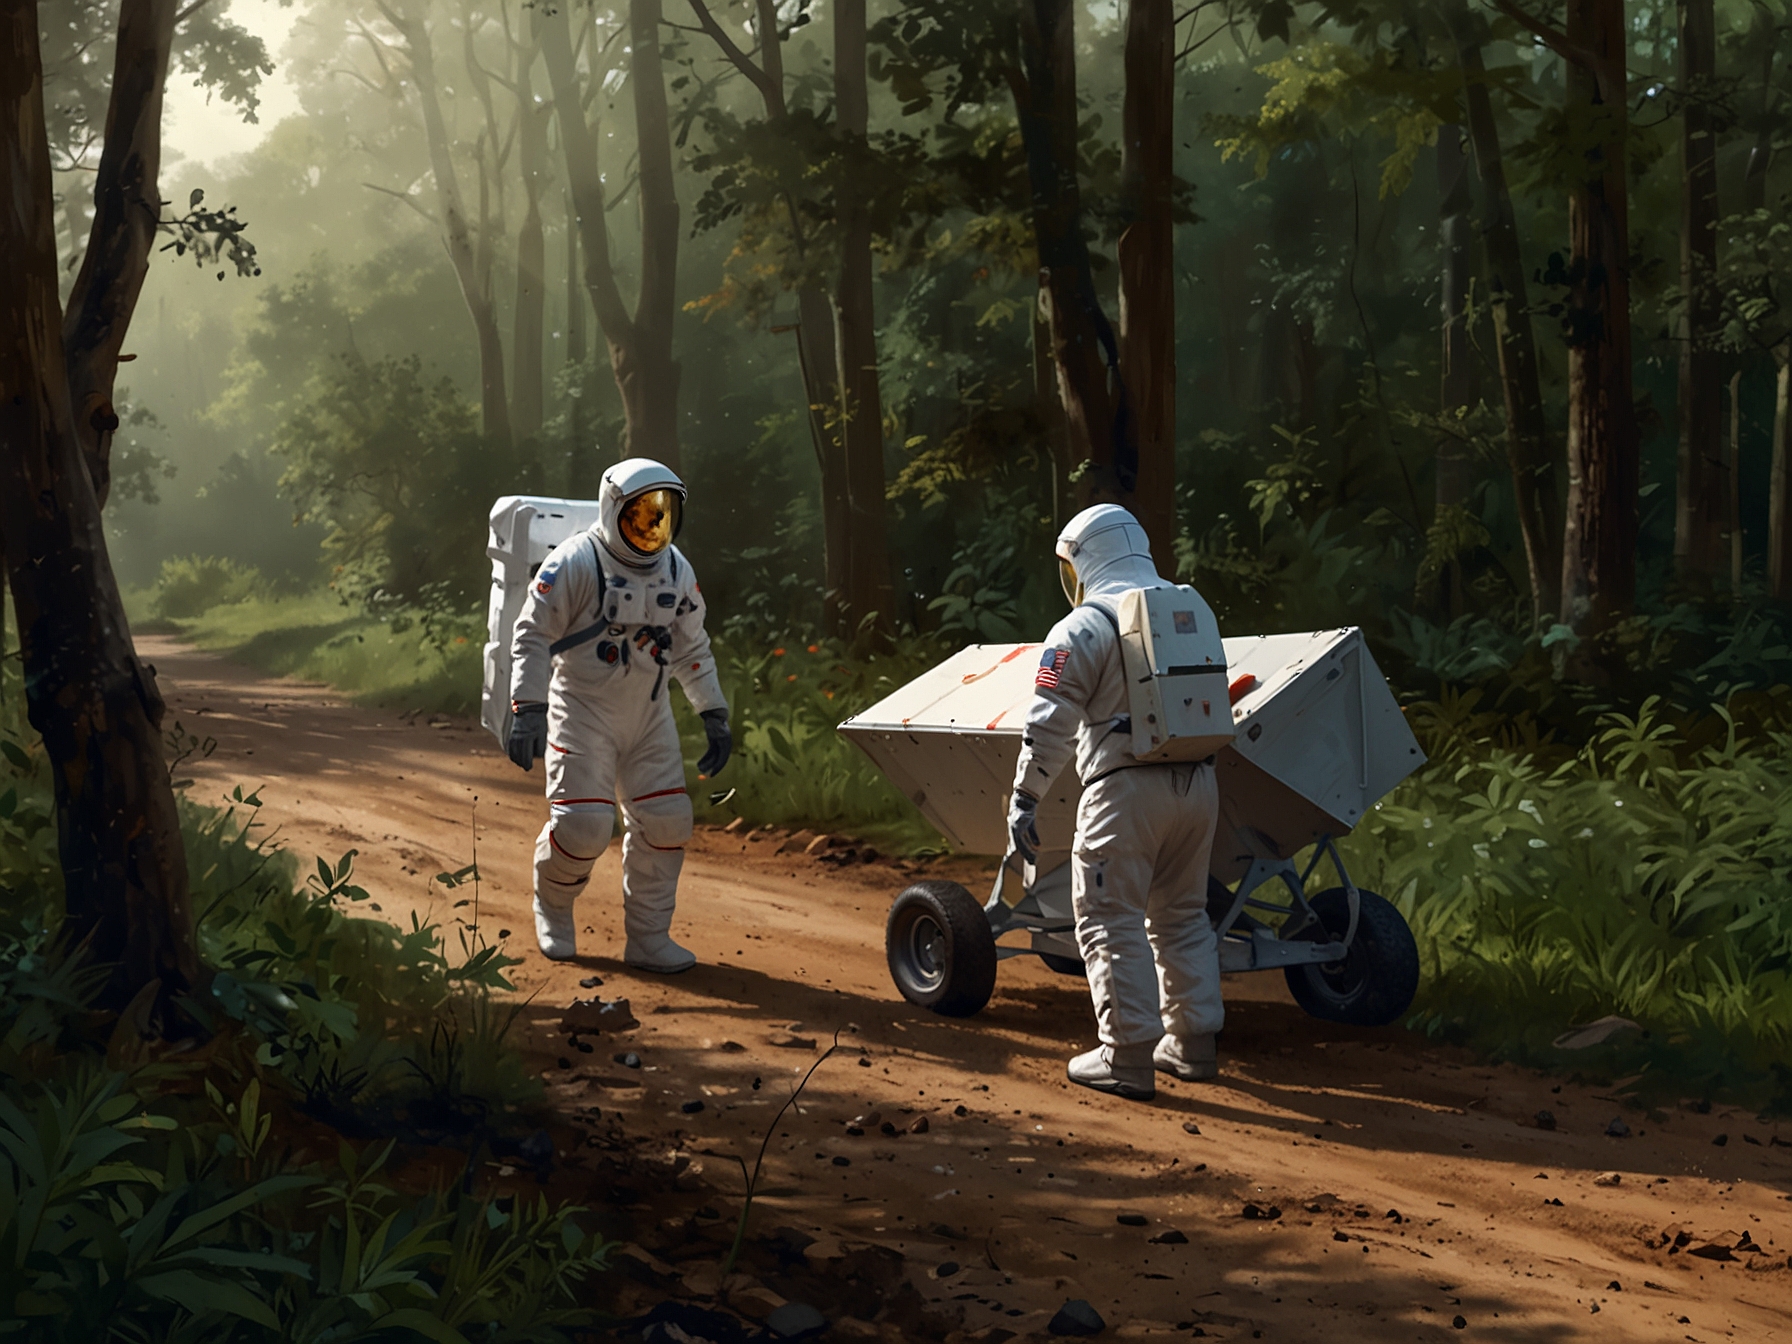 NASA investigators collect debris samples from a rural walking trail. The debris has been confirmed as a segment from a previous SpaceX mission, highlighting the issue of increasing space junk.